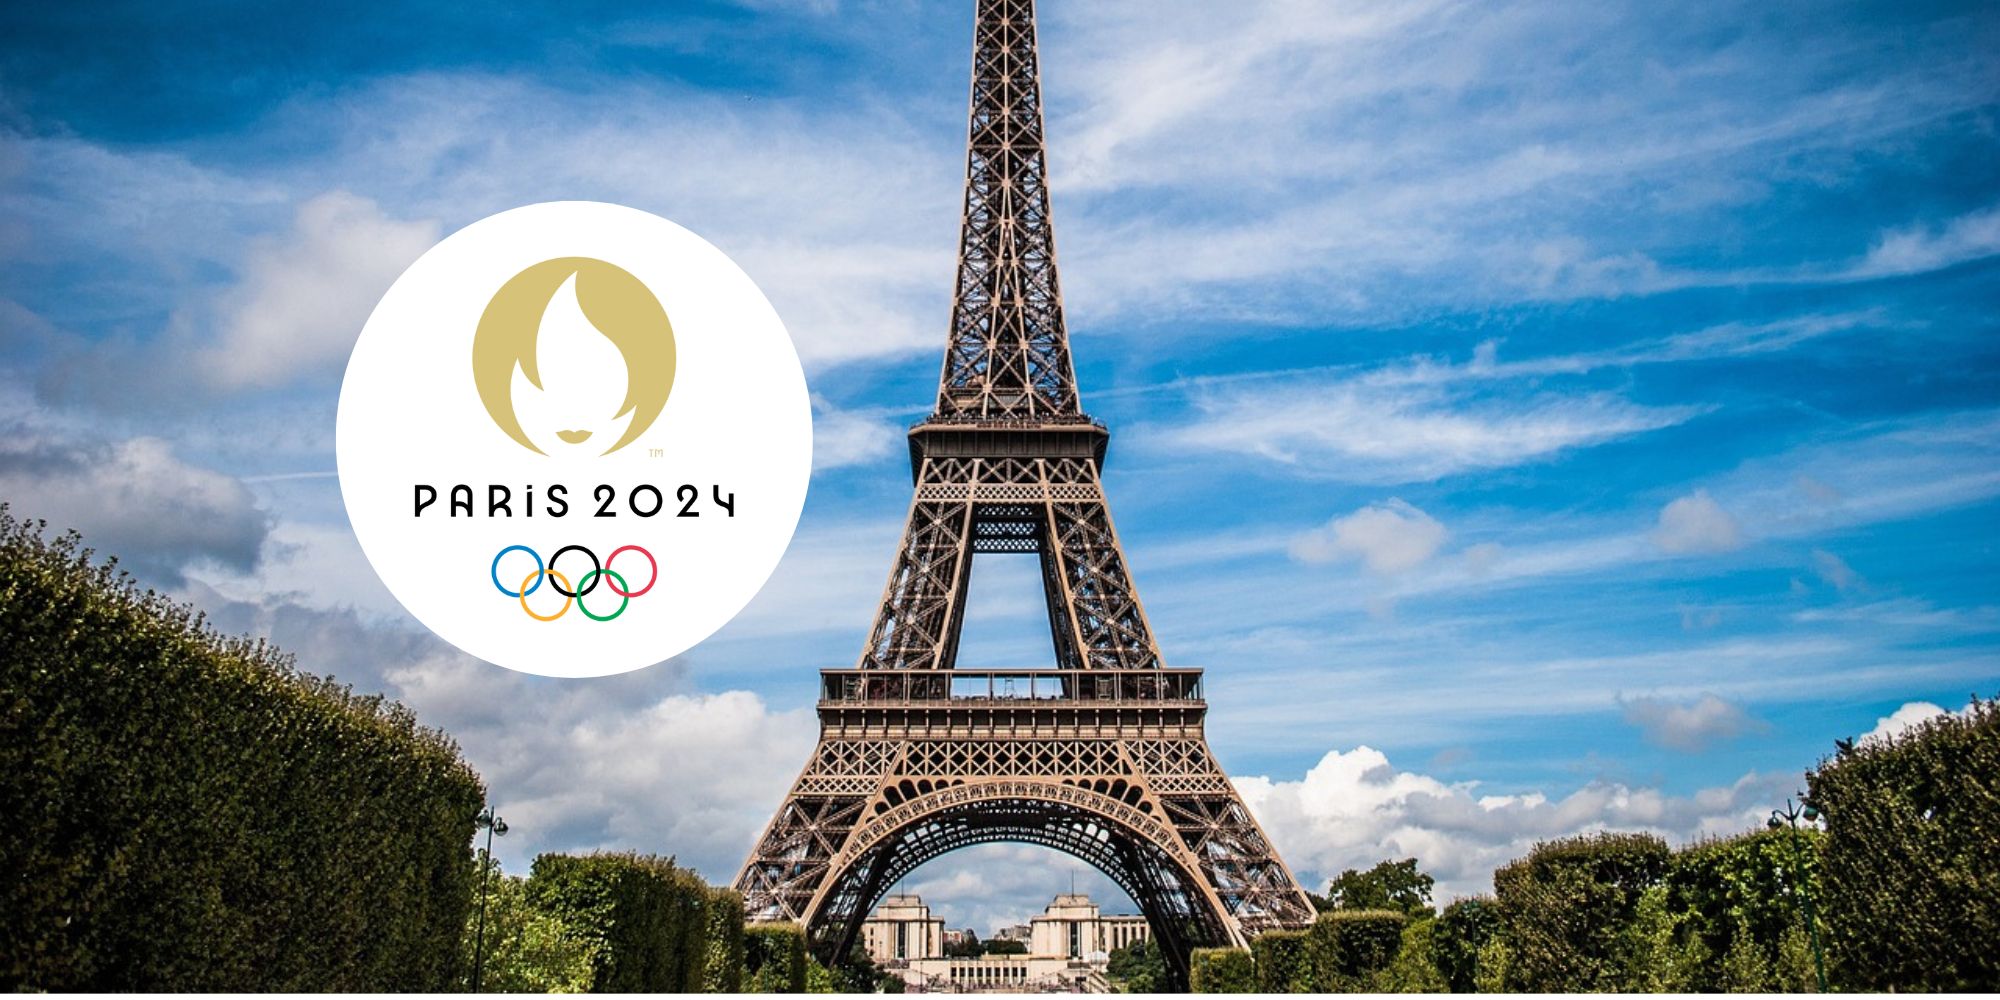 Upholding Hospitality Standards: Learning from guest reviews, cleanliness ratings, and bed bug infestations for the 2024 Olympics in Paris.